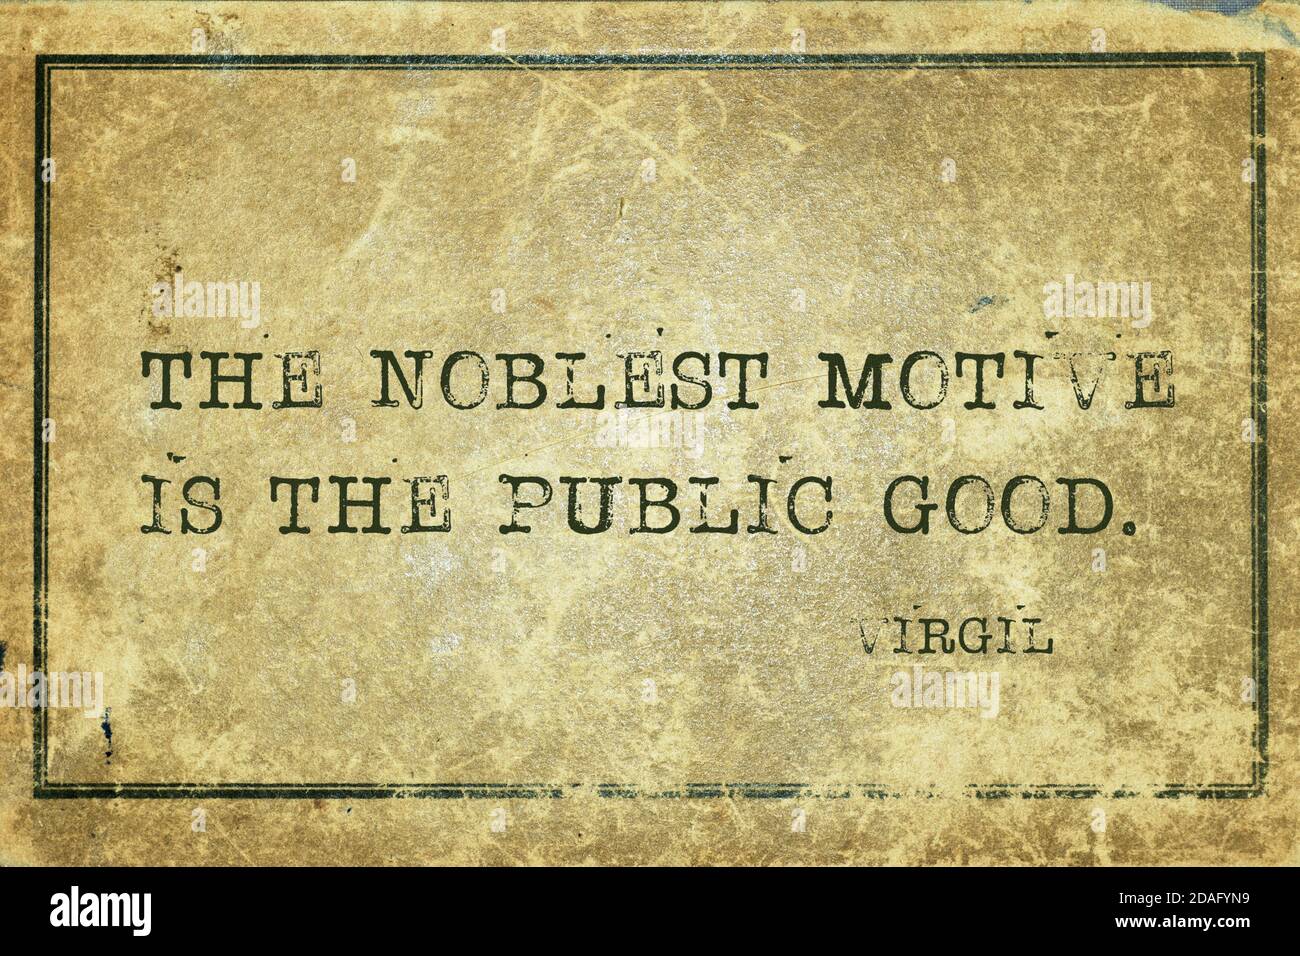 The noblest motive is the public good - ancient Roman poet Virgil quote printed on grunge vintage cardboard Stock Photo